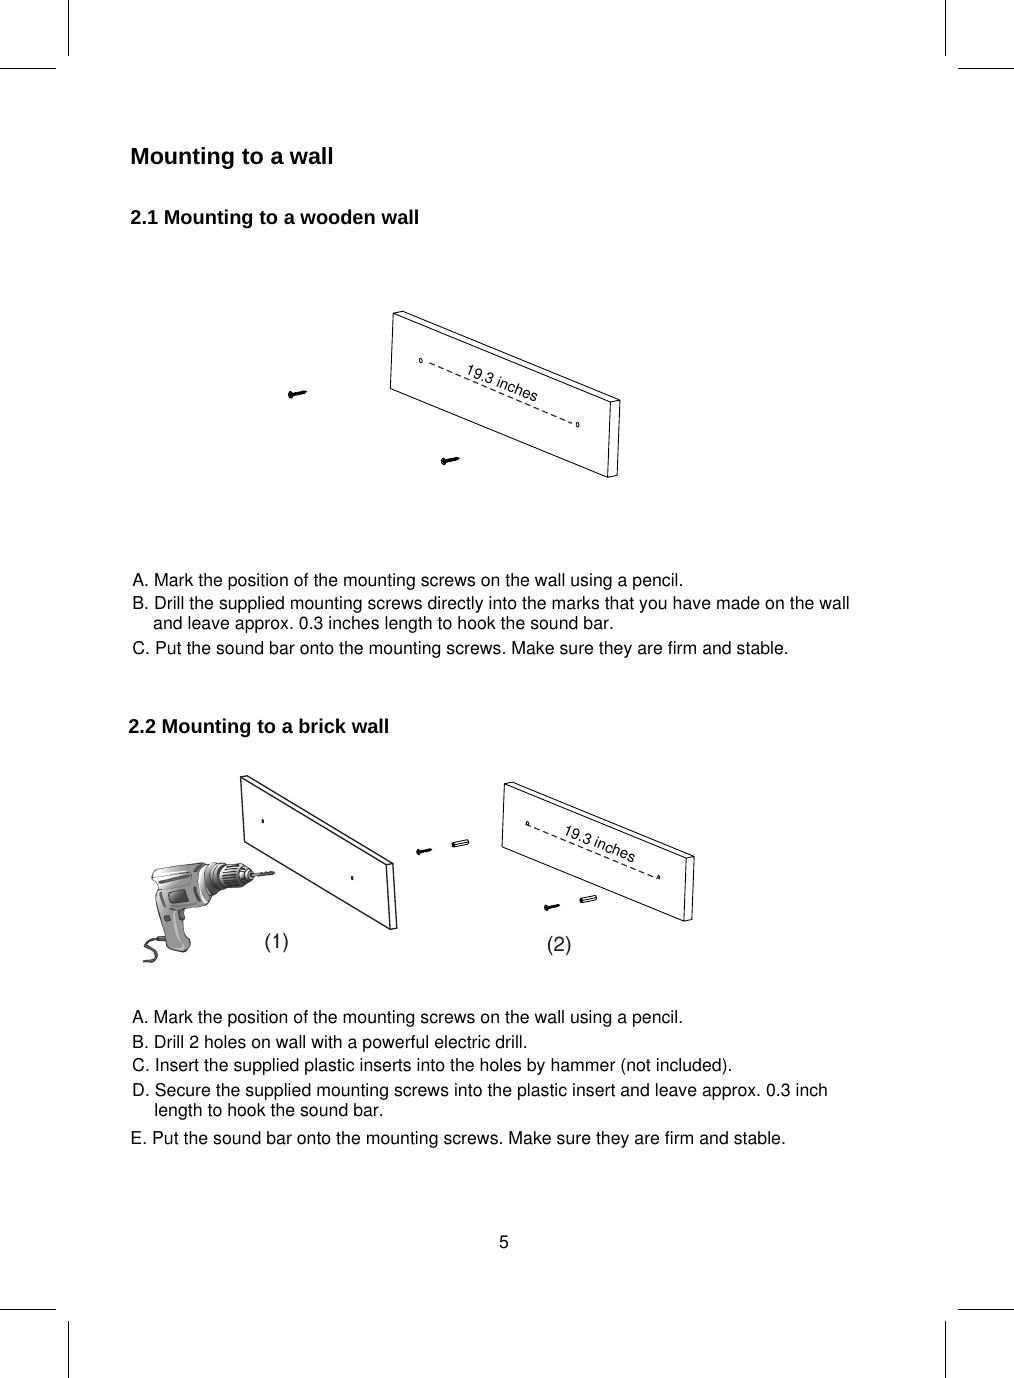 Mounting to a wall2.1 Mountingto a wooden wall2.2 Mountingto a brick wall(1) (2)19.3 inches19.3 inches5A. Mark the position of the mounting screws on the wall using a pencil.B. Drill the supplied mounting screws directly into the marks that you have made on the walland leave approx. 0.3 inches length to hook the sound bar.C. Put the sound bar onto the mounting screws. Make sure they are firm and stable.A. Mark the position of the mounting screws on the wall using a pencil.E. Put the sound bar onto the mounting screws. Make sure they are firm and stable.B. Drill 2 holes on wall with a powerful electric drill.C. Insert the supplied plastic inserts into the holes by hammer (not included).D. Secure the supplied mounting screws into the plastic insert and leave approx. 0.3 inchlength to hook the sound bar.